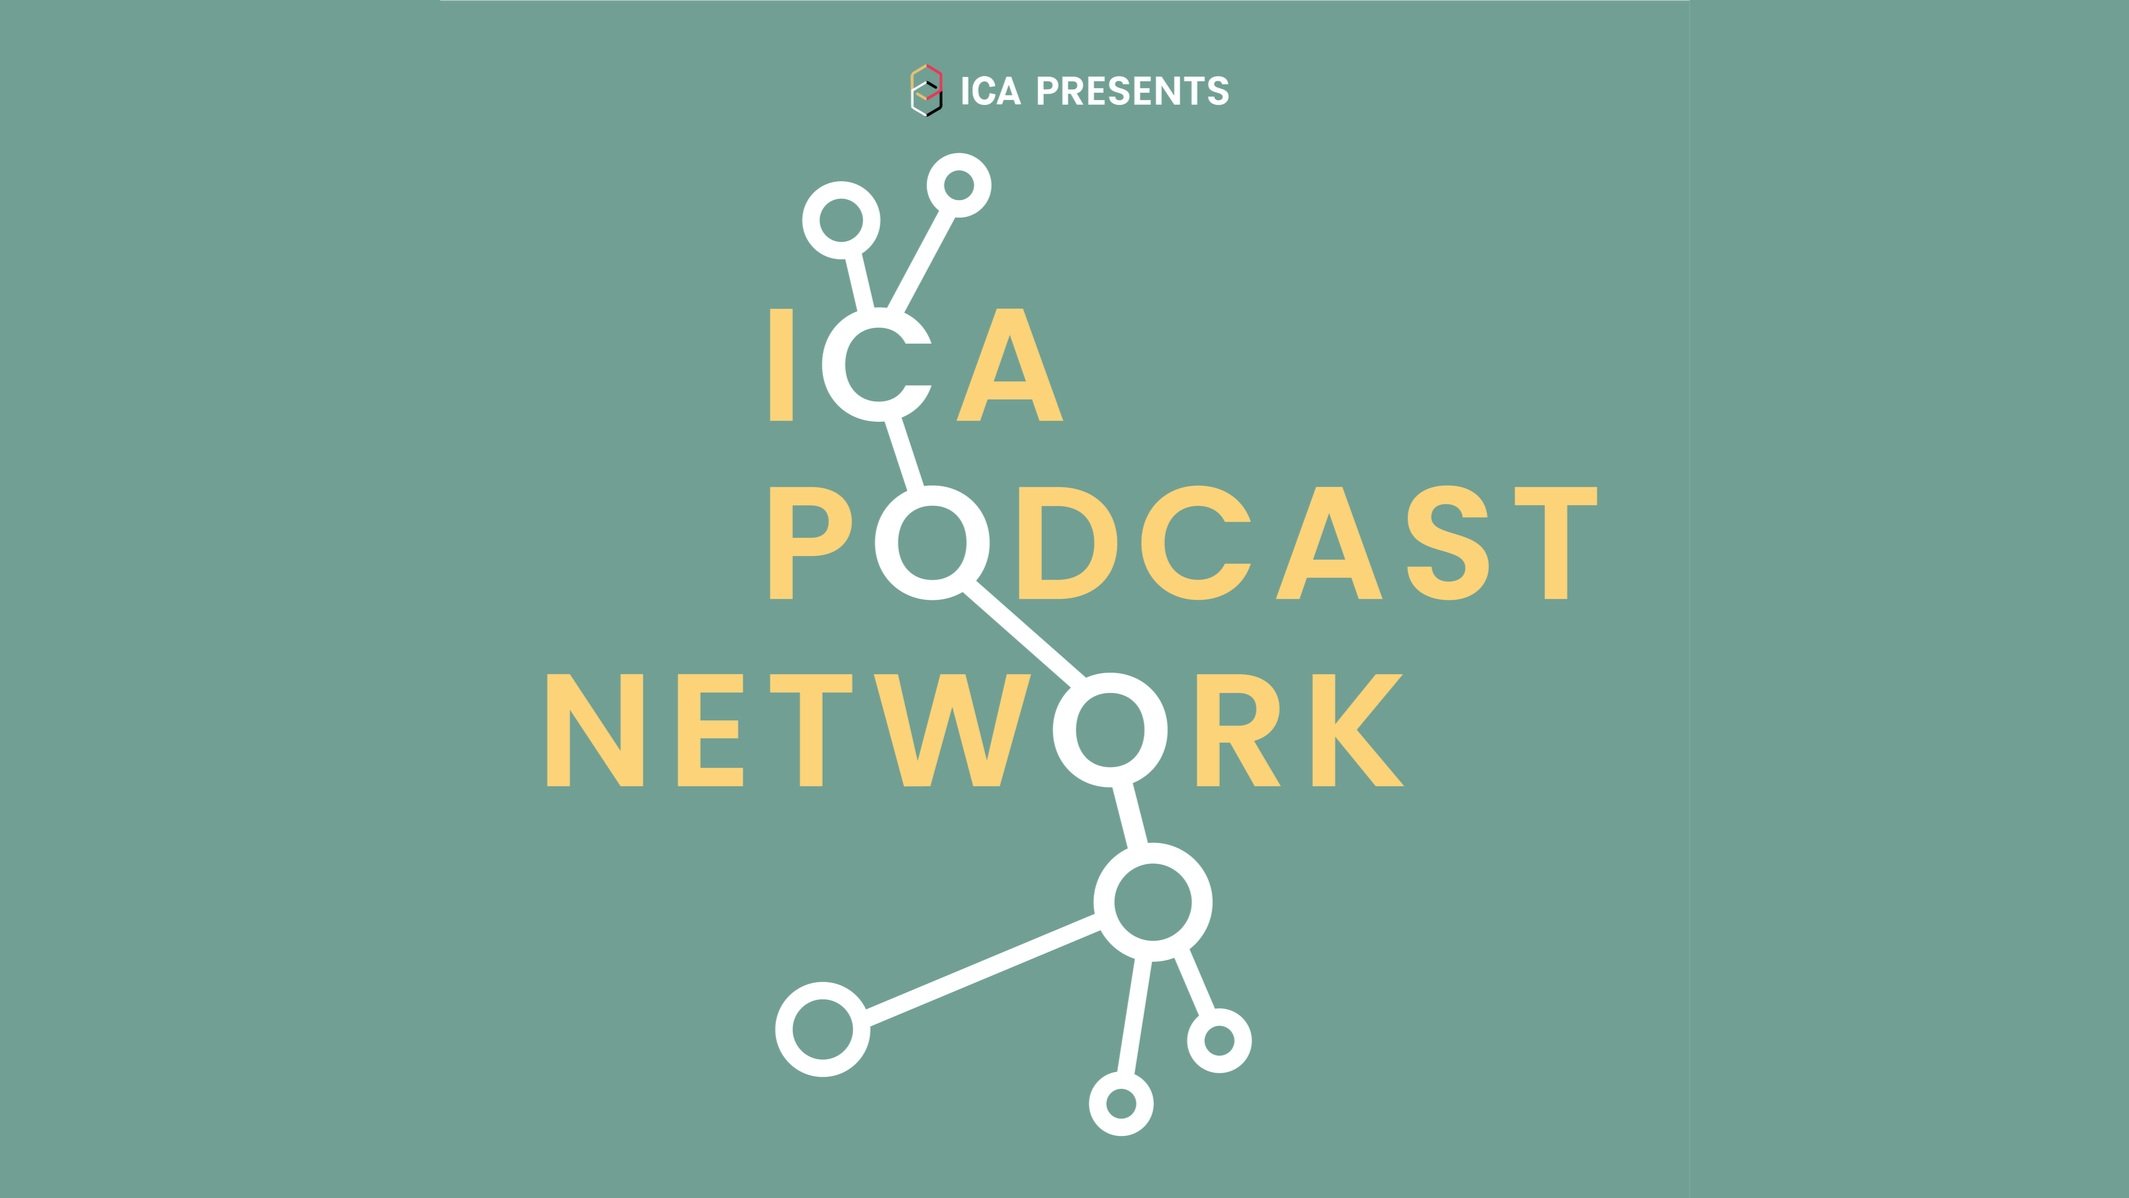 ICA Podcast Network